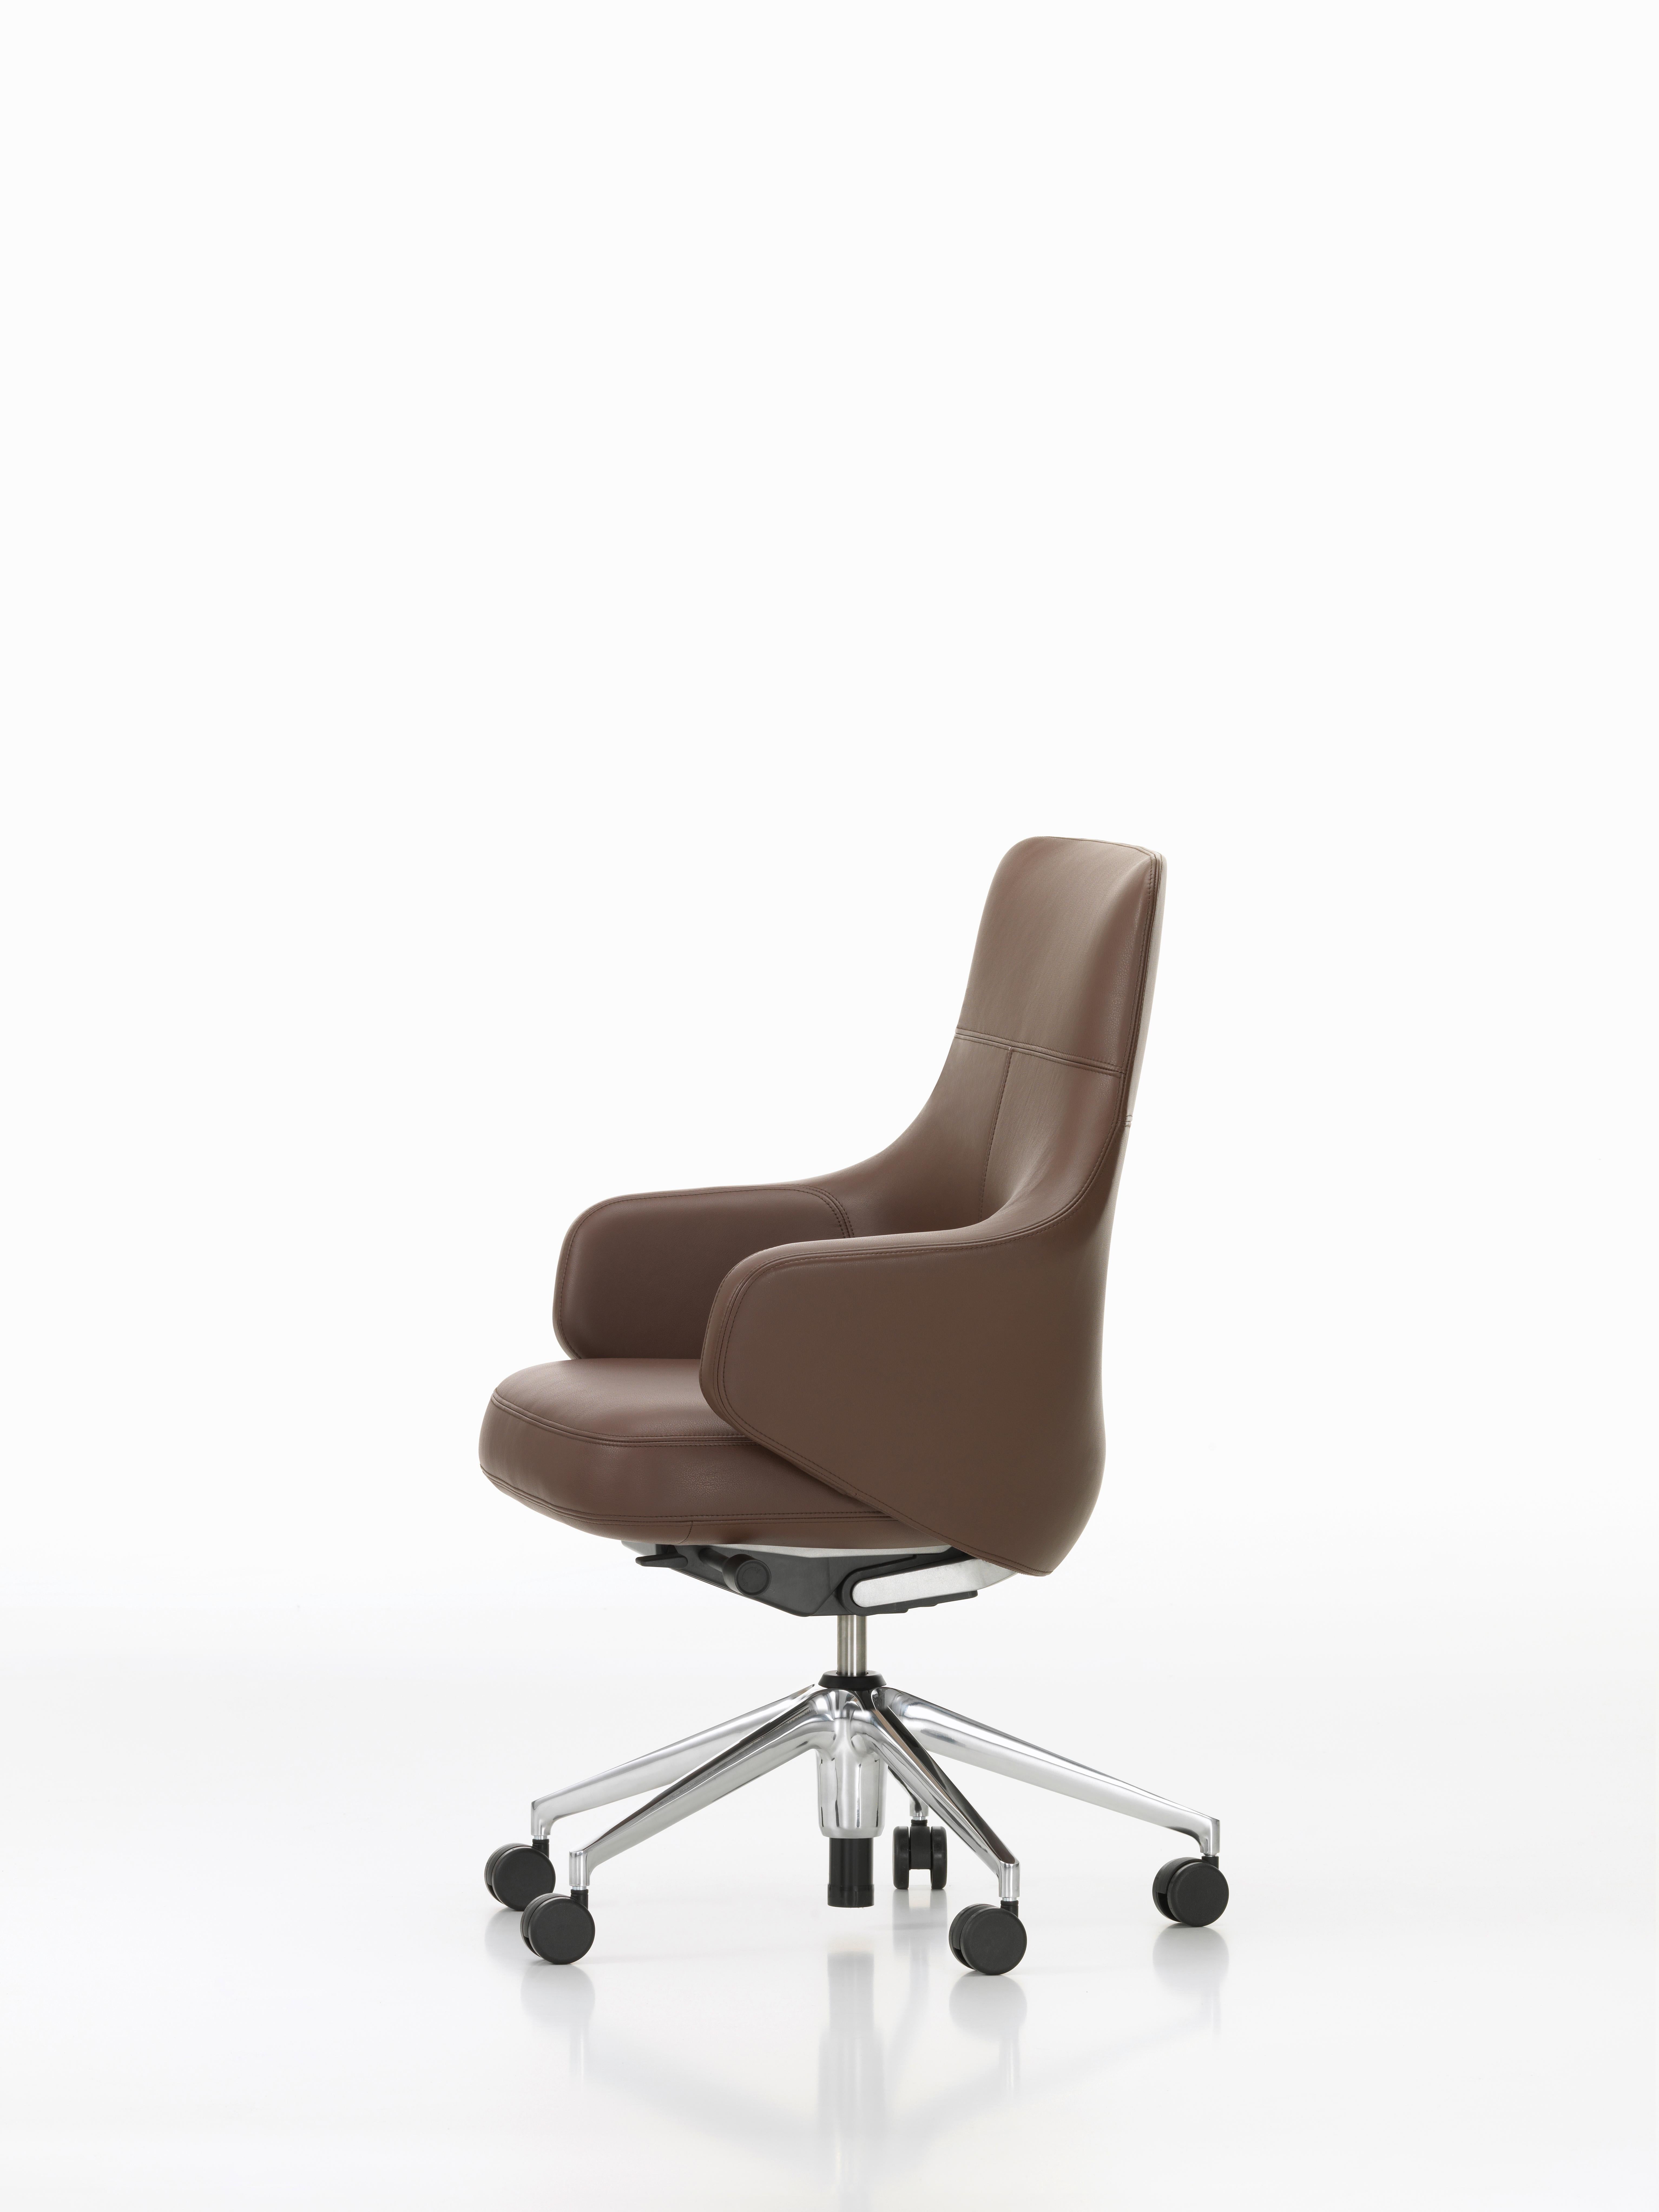 Vitra Grand Executive Lowback Chair in Maroon Leather by Antonio Citterio In New Condition For Sale In New York, NY